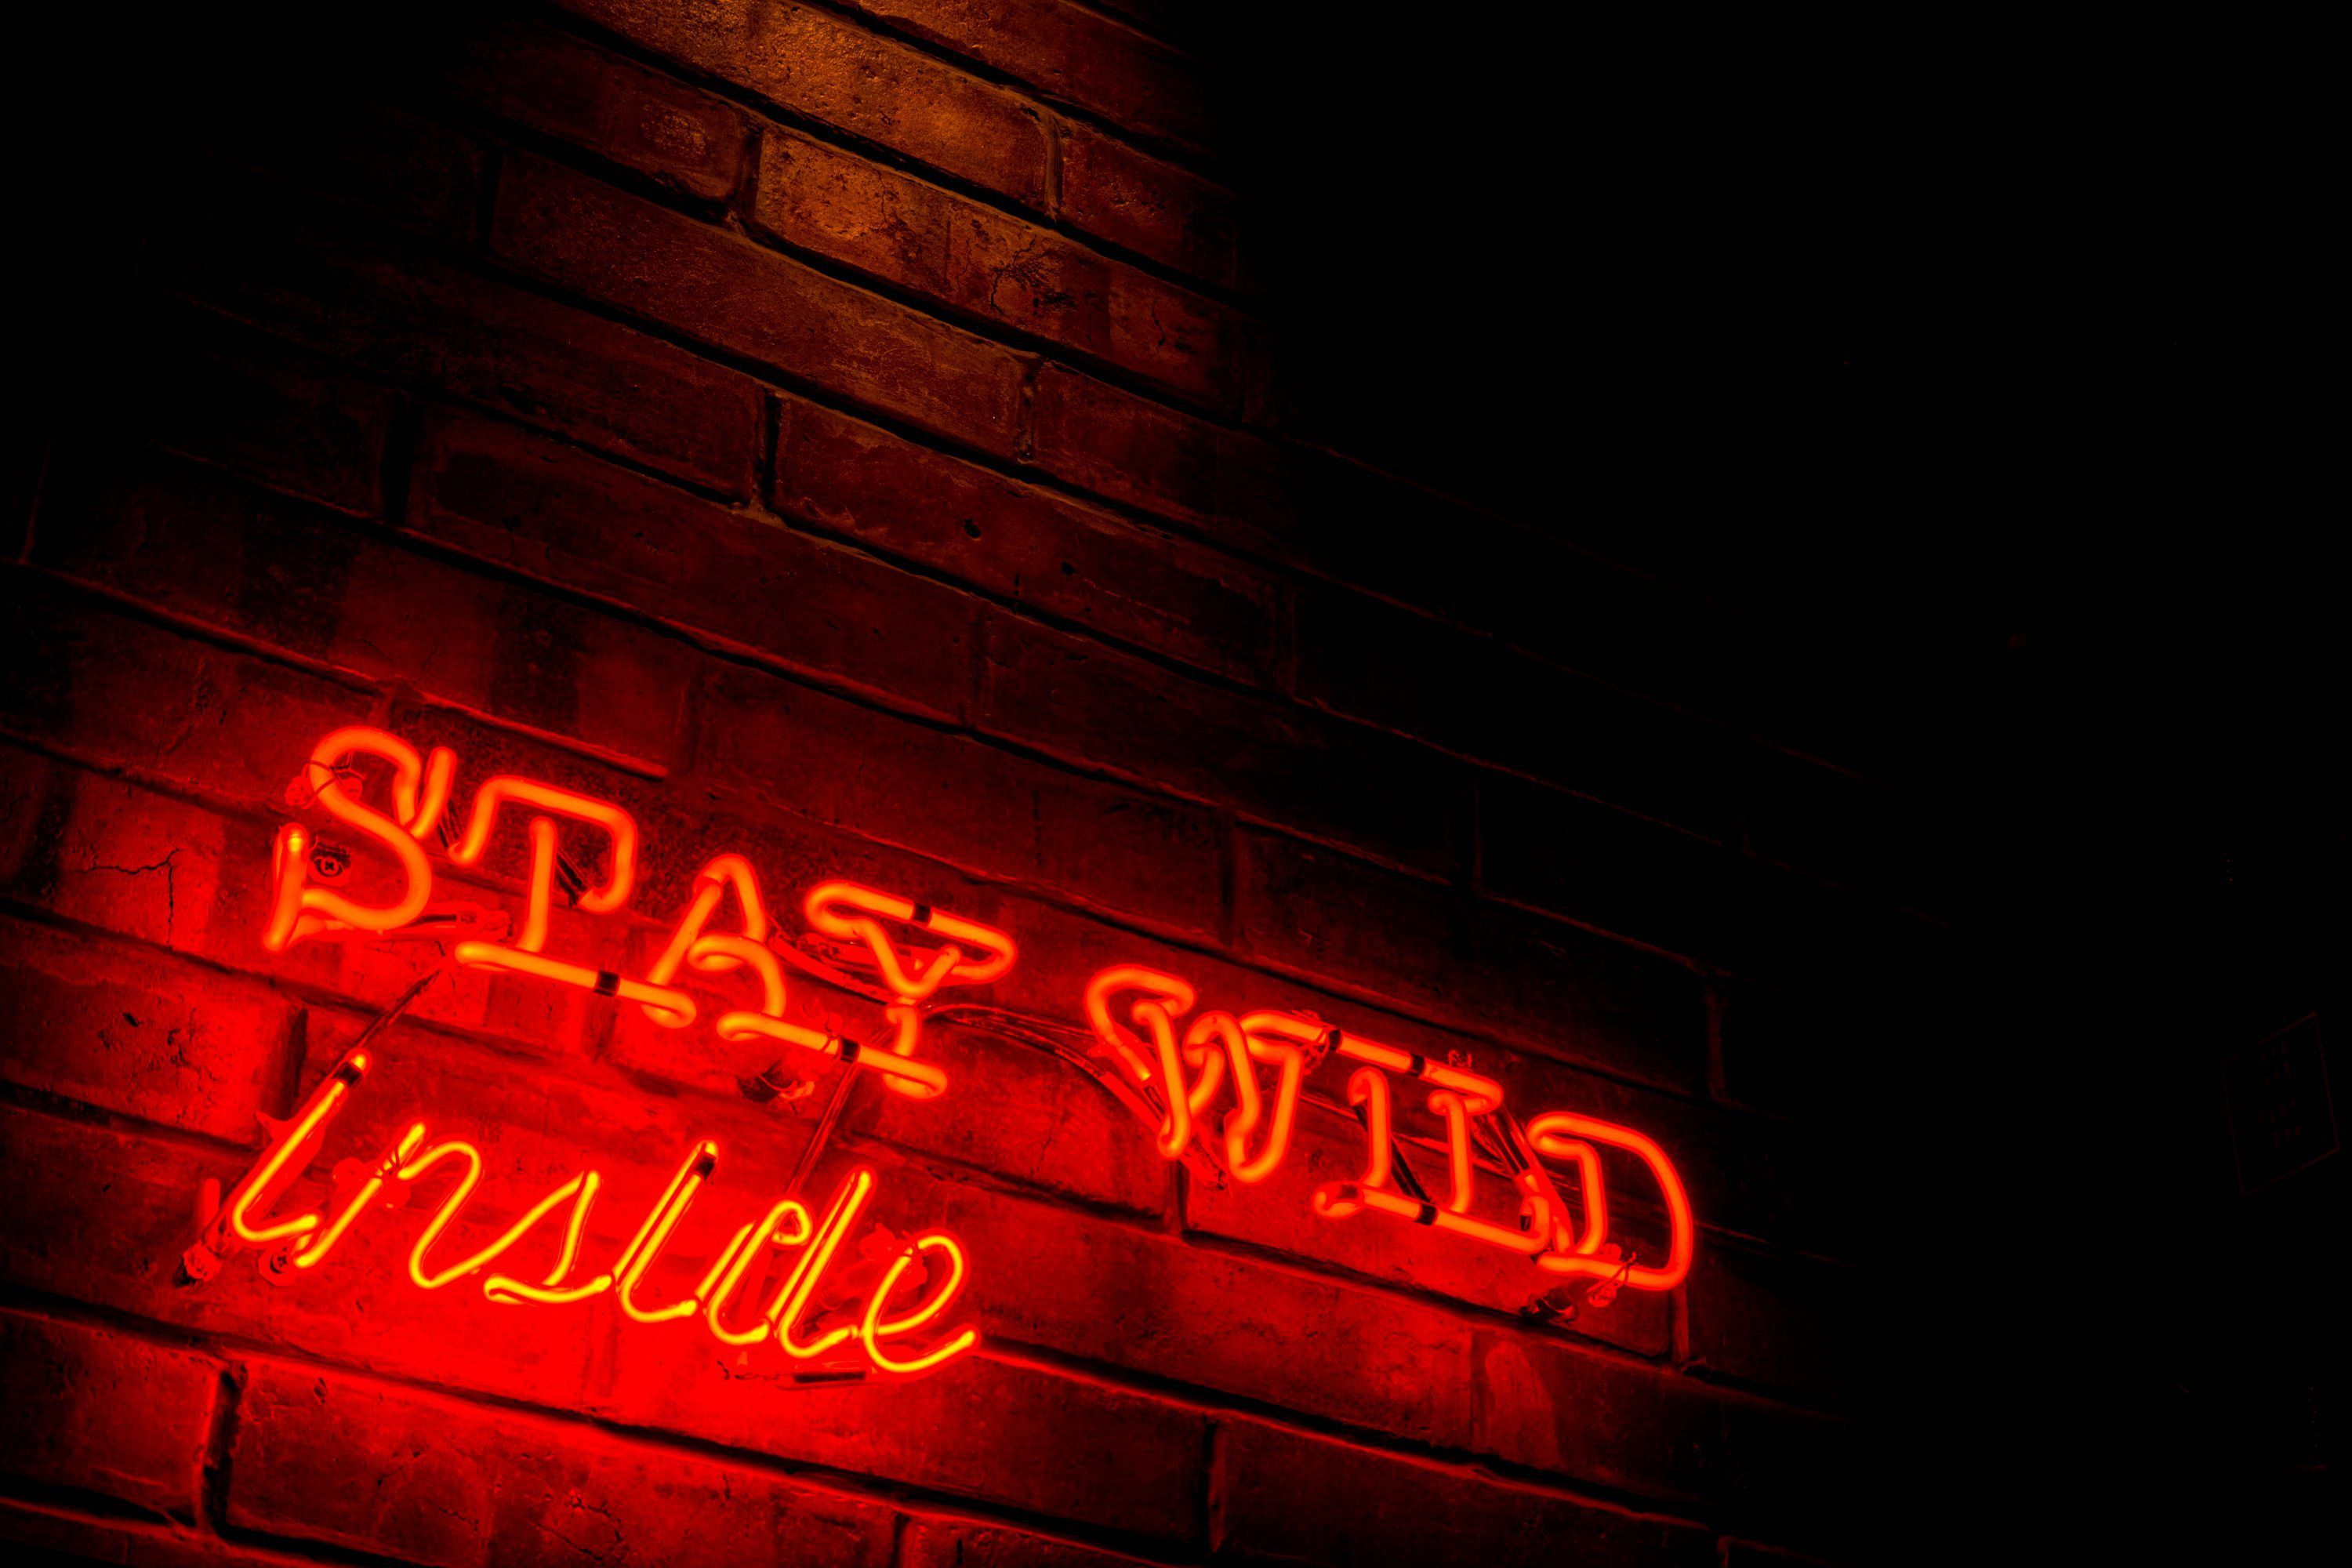 Stay Wild Inside Red Neon Sign Free. Bucket. Neon signs, Neon quotes, Neon aesthetic